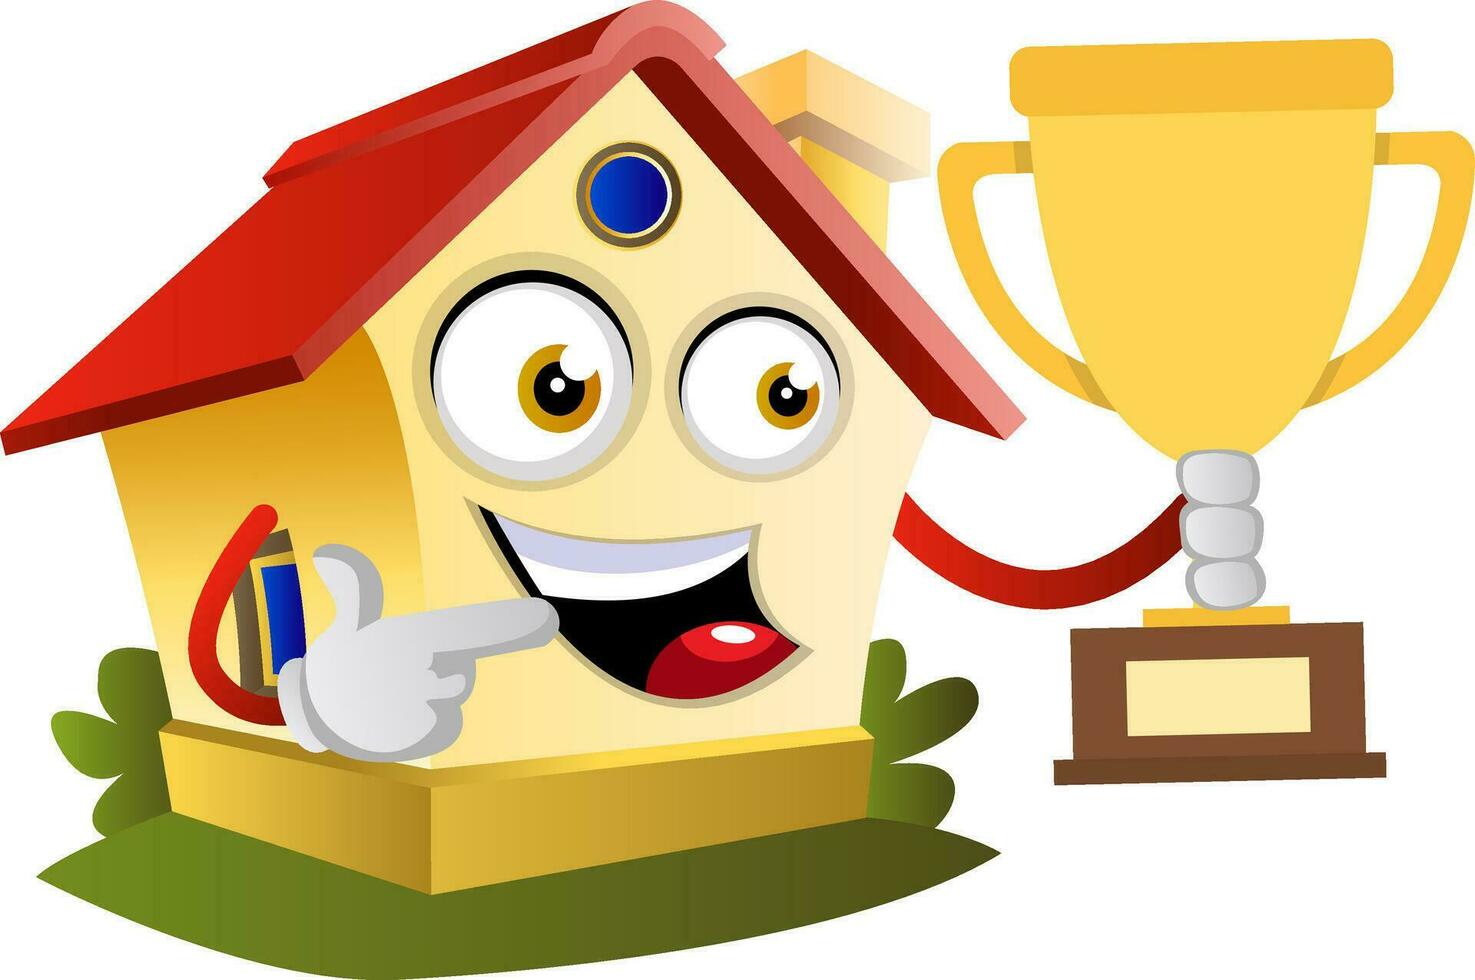 House is pointing on a winning trophy, illustration, vector on white background.